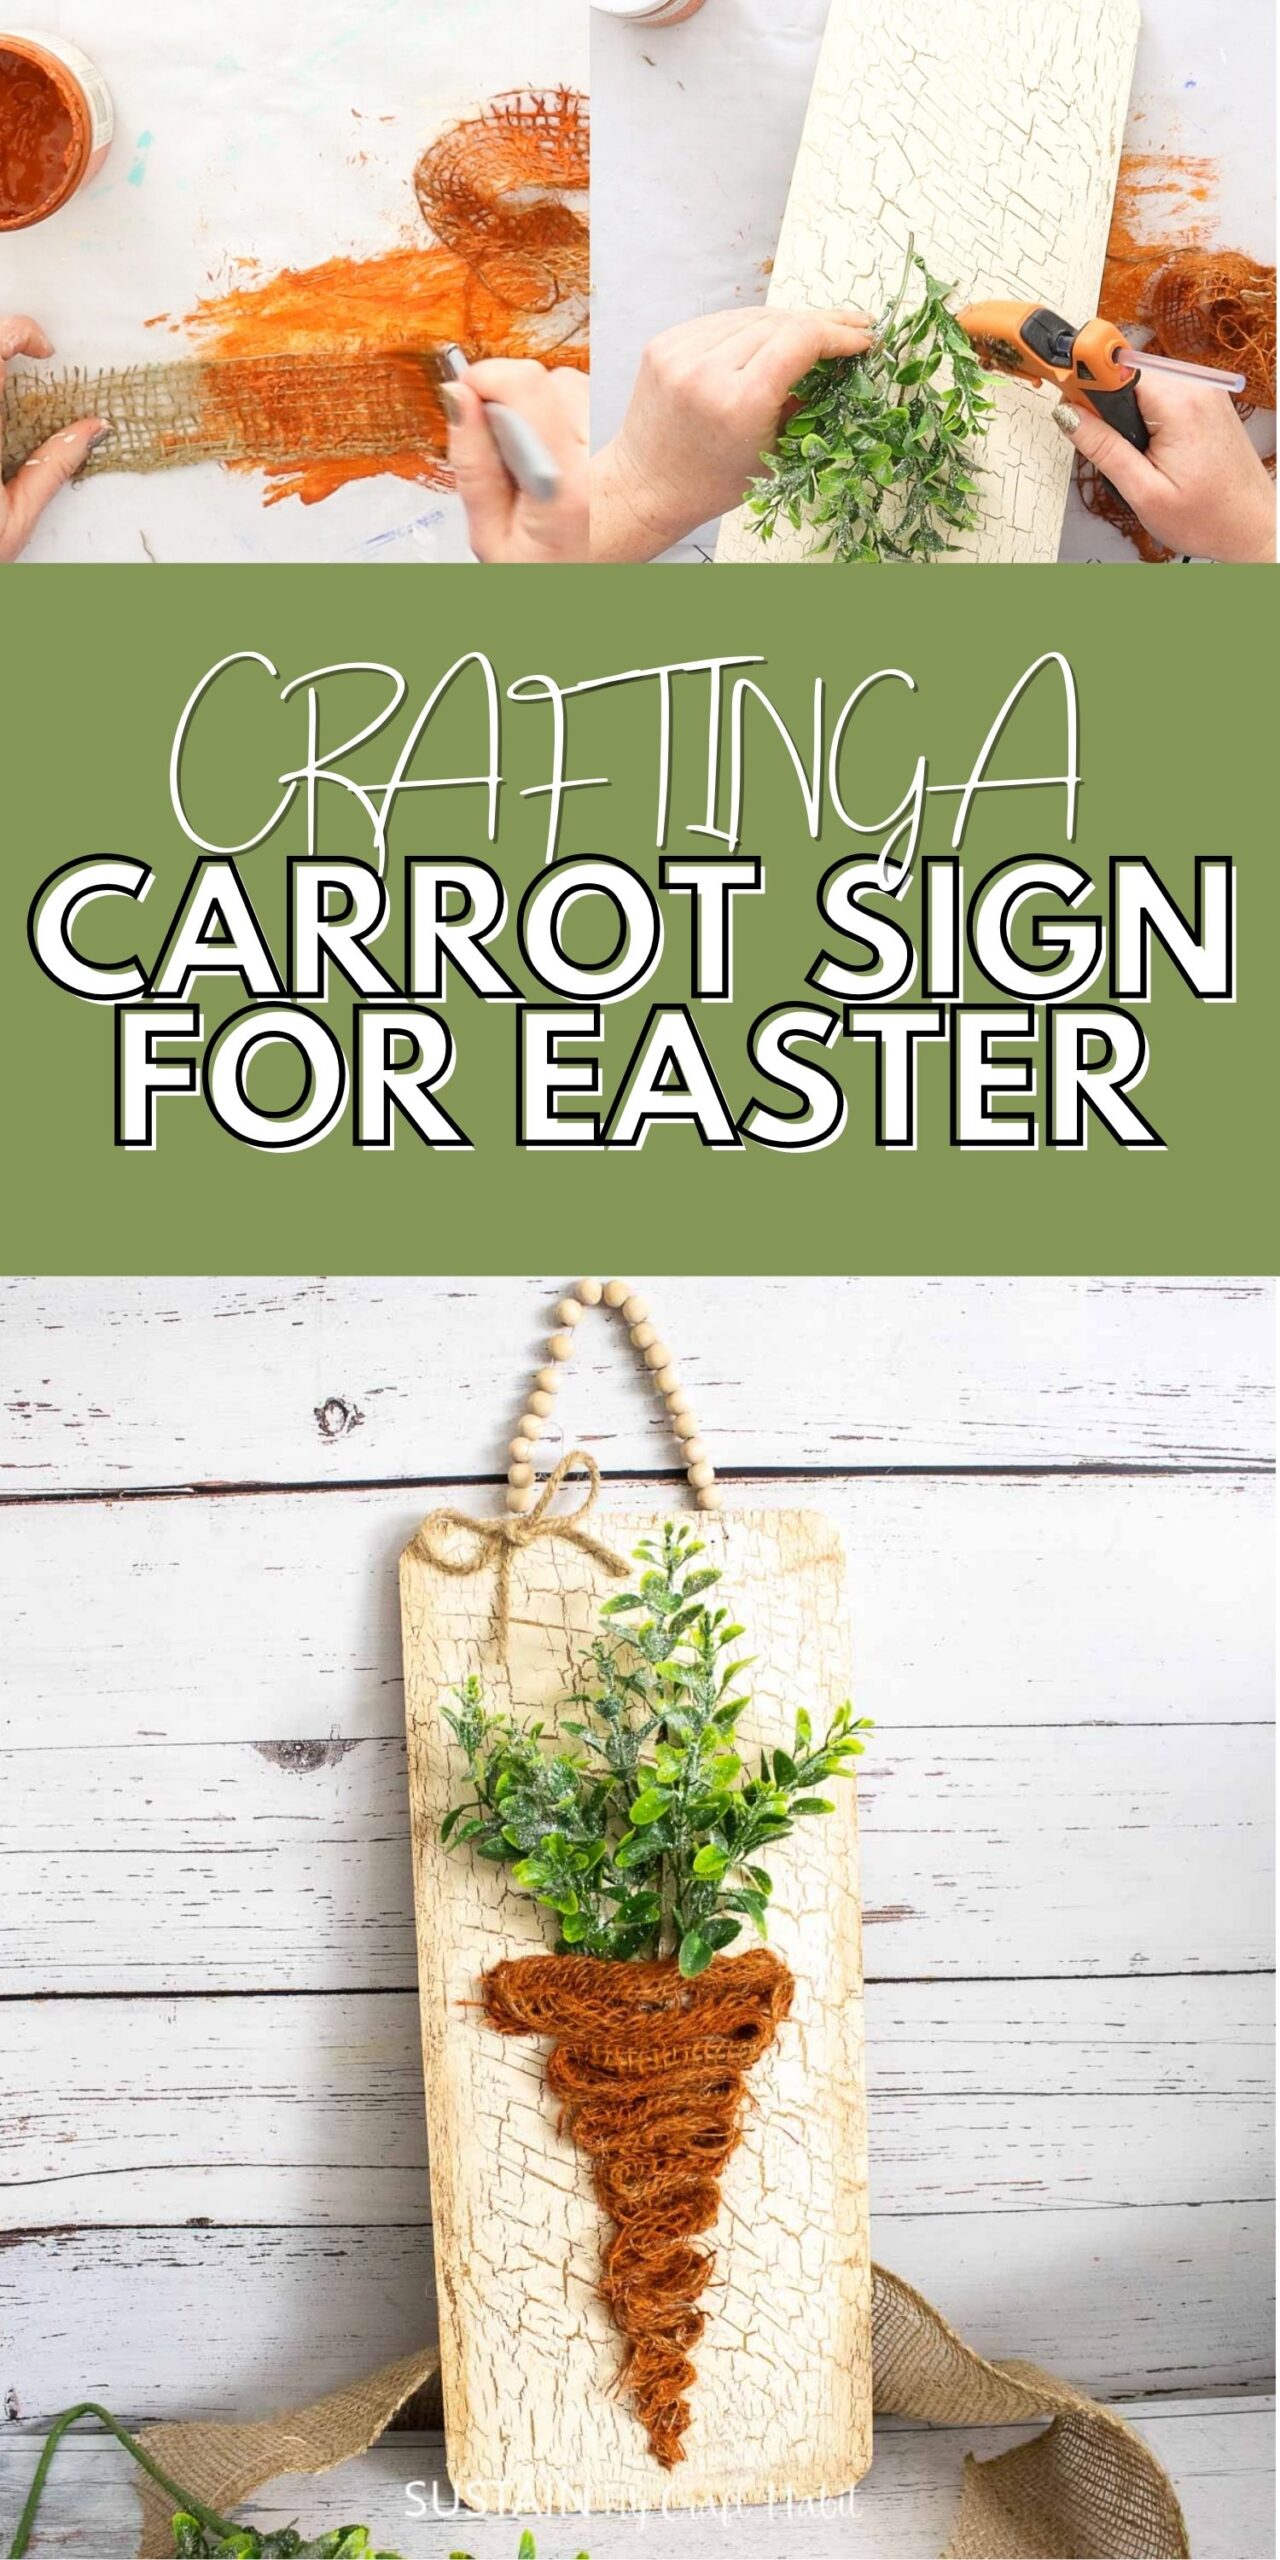 Collage of process pictures showing how to make a carrot sign for Easter using a cedar plank, burlap and paint.